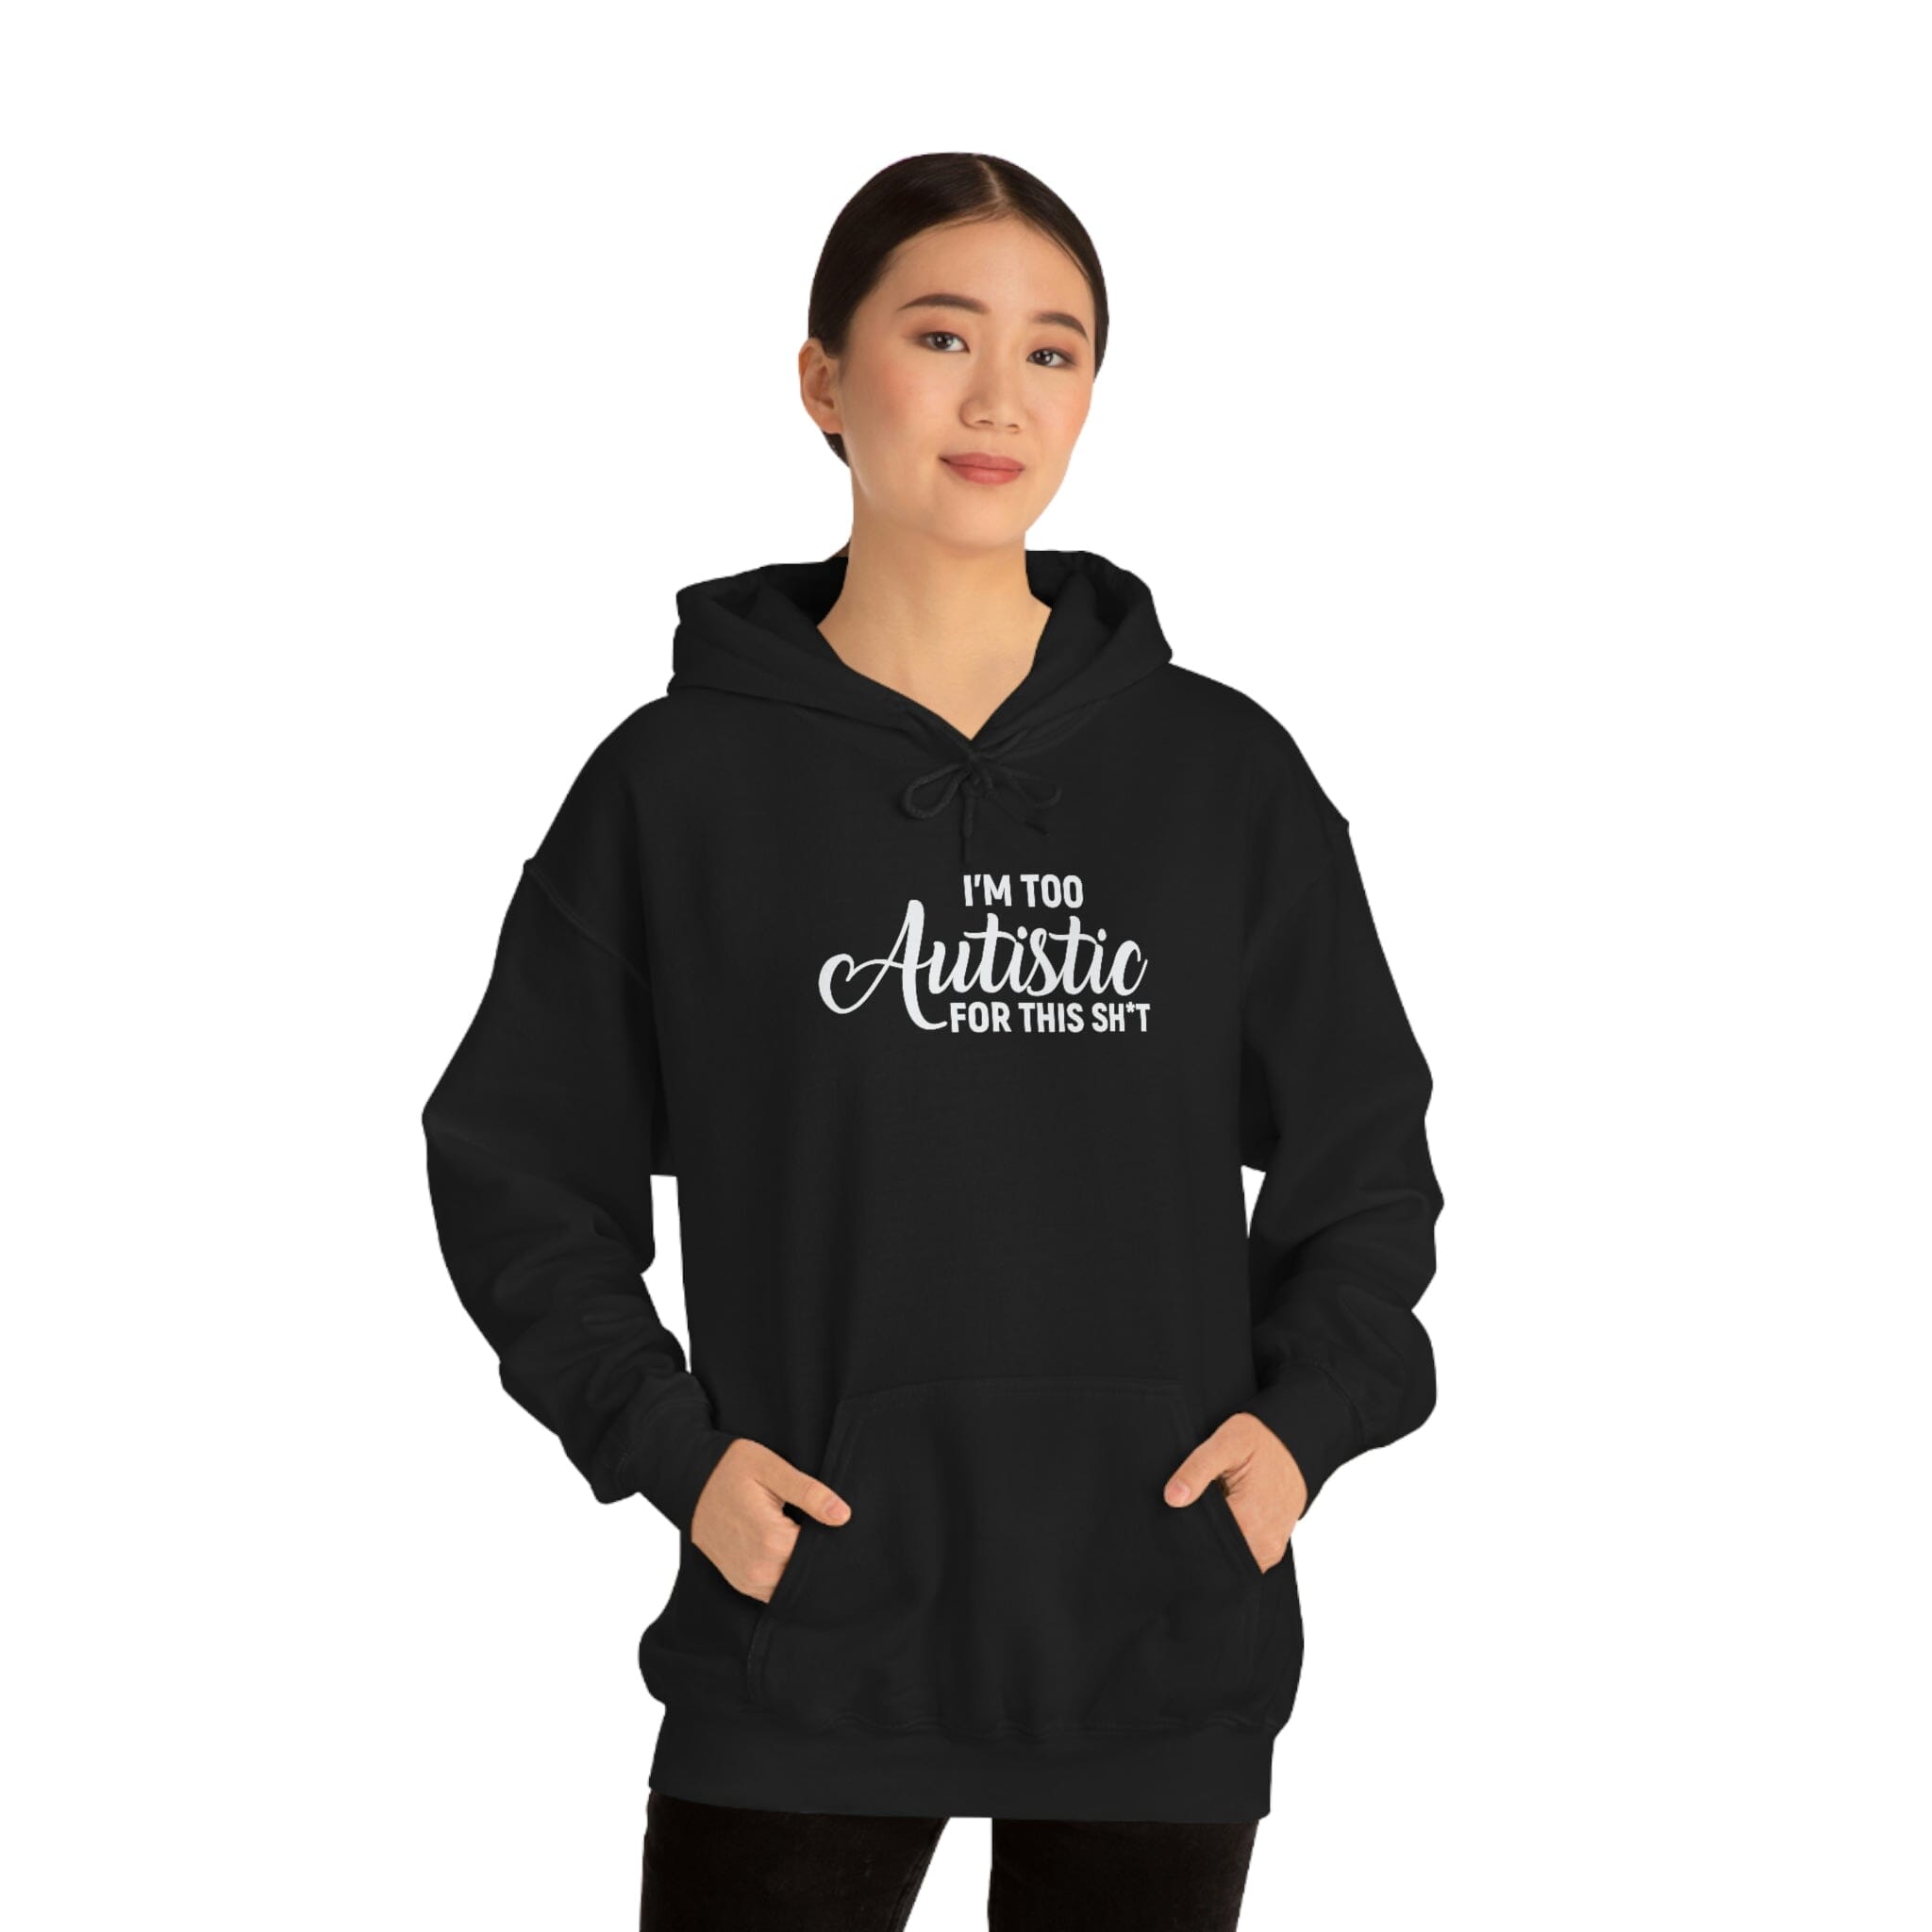 I'm Too Autistic for This Sh*t Unisex Hoodie Hoodie The Autistic Innovator 